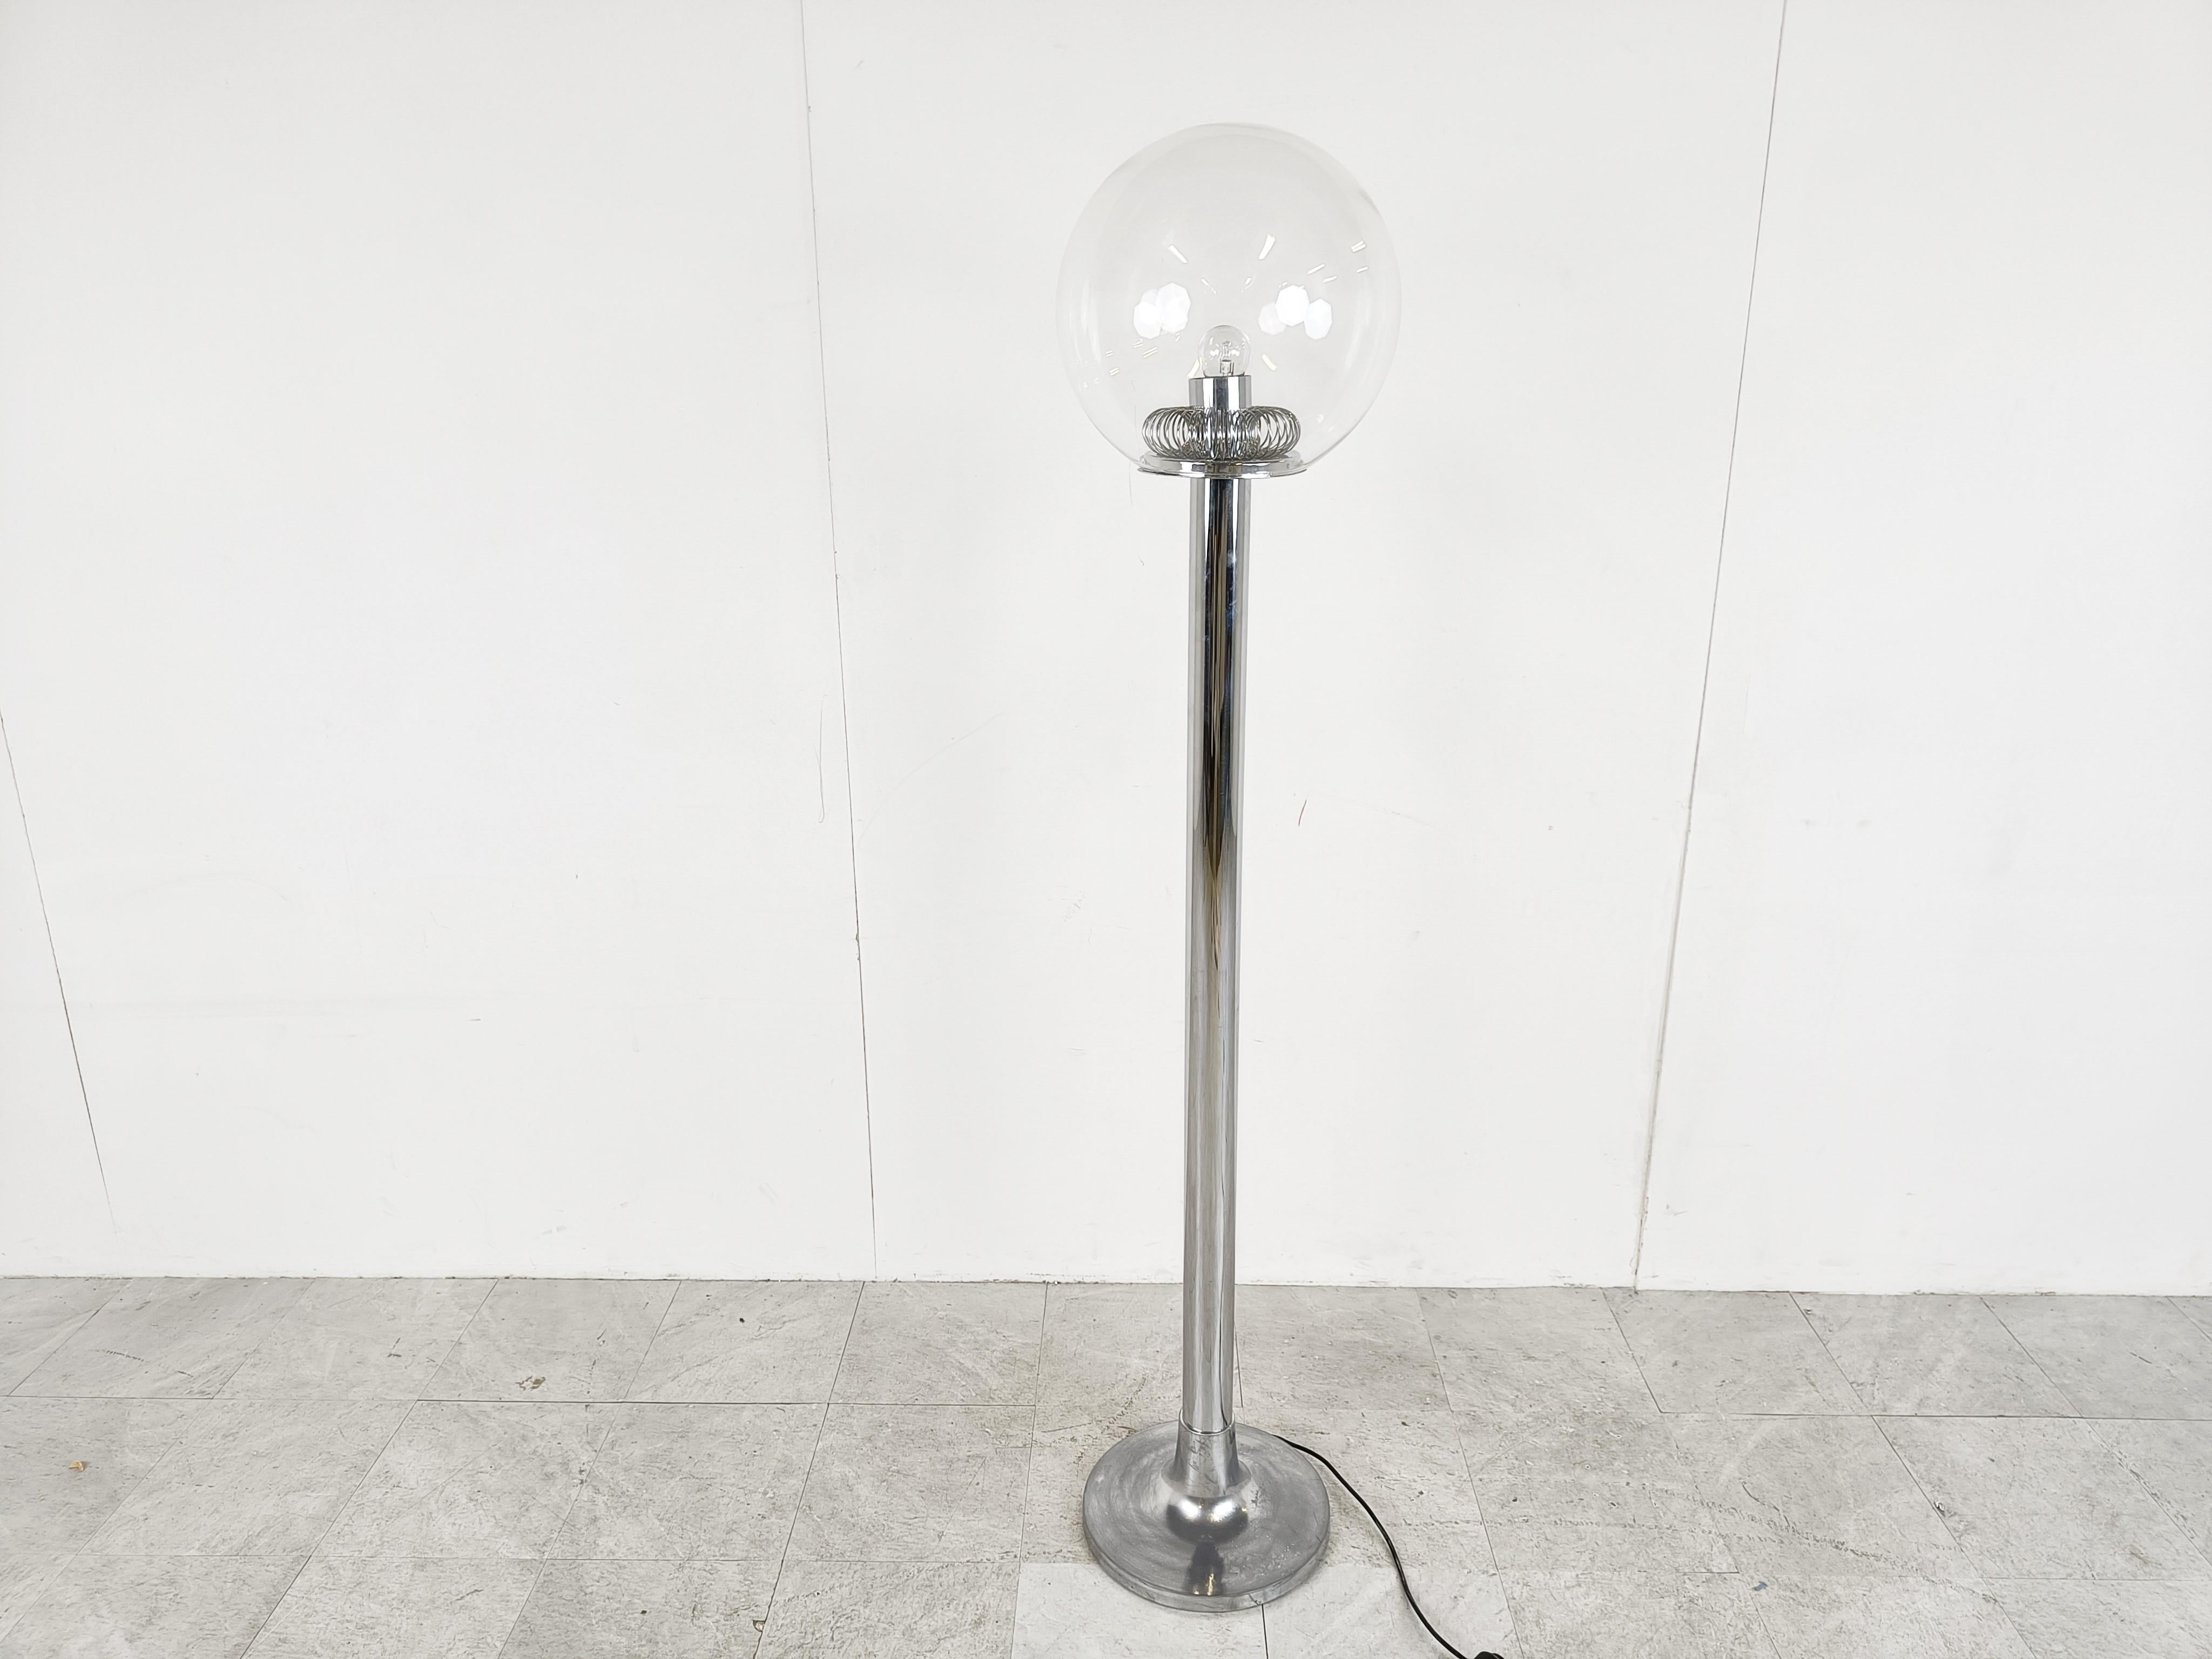 Midcentury chrome floor lamp with a globe glass lamp shade.

Beautiful seventies design.

The lamp emits a beautiful diffuse light.

Tested and ready to use and works with a regular E27 Edison screw lamp

Very much in the style of